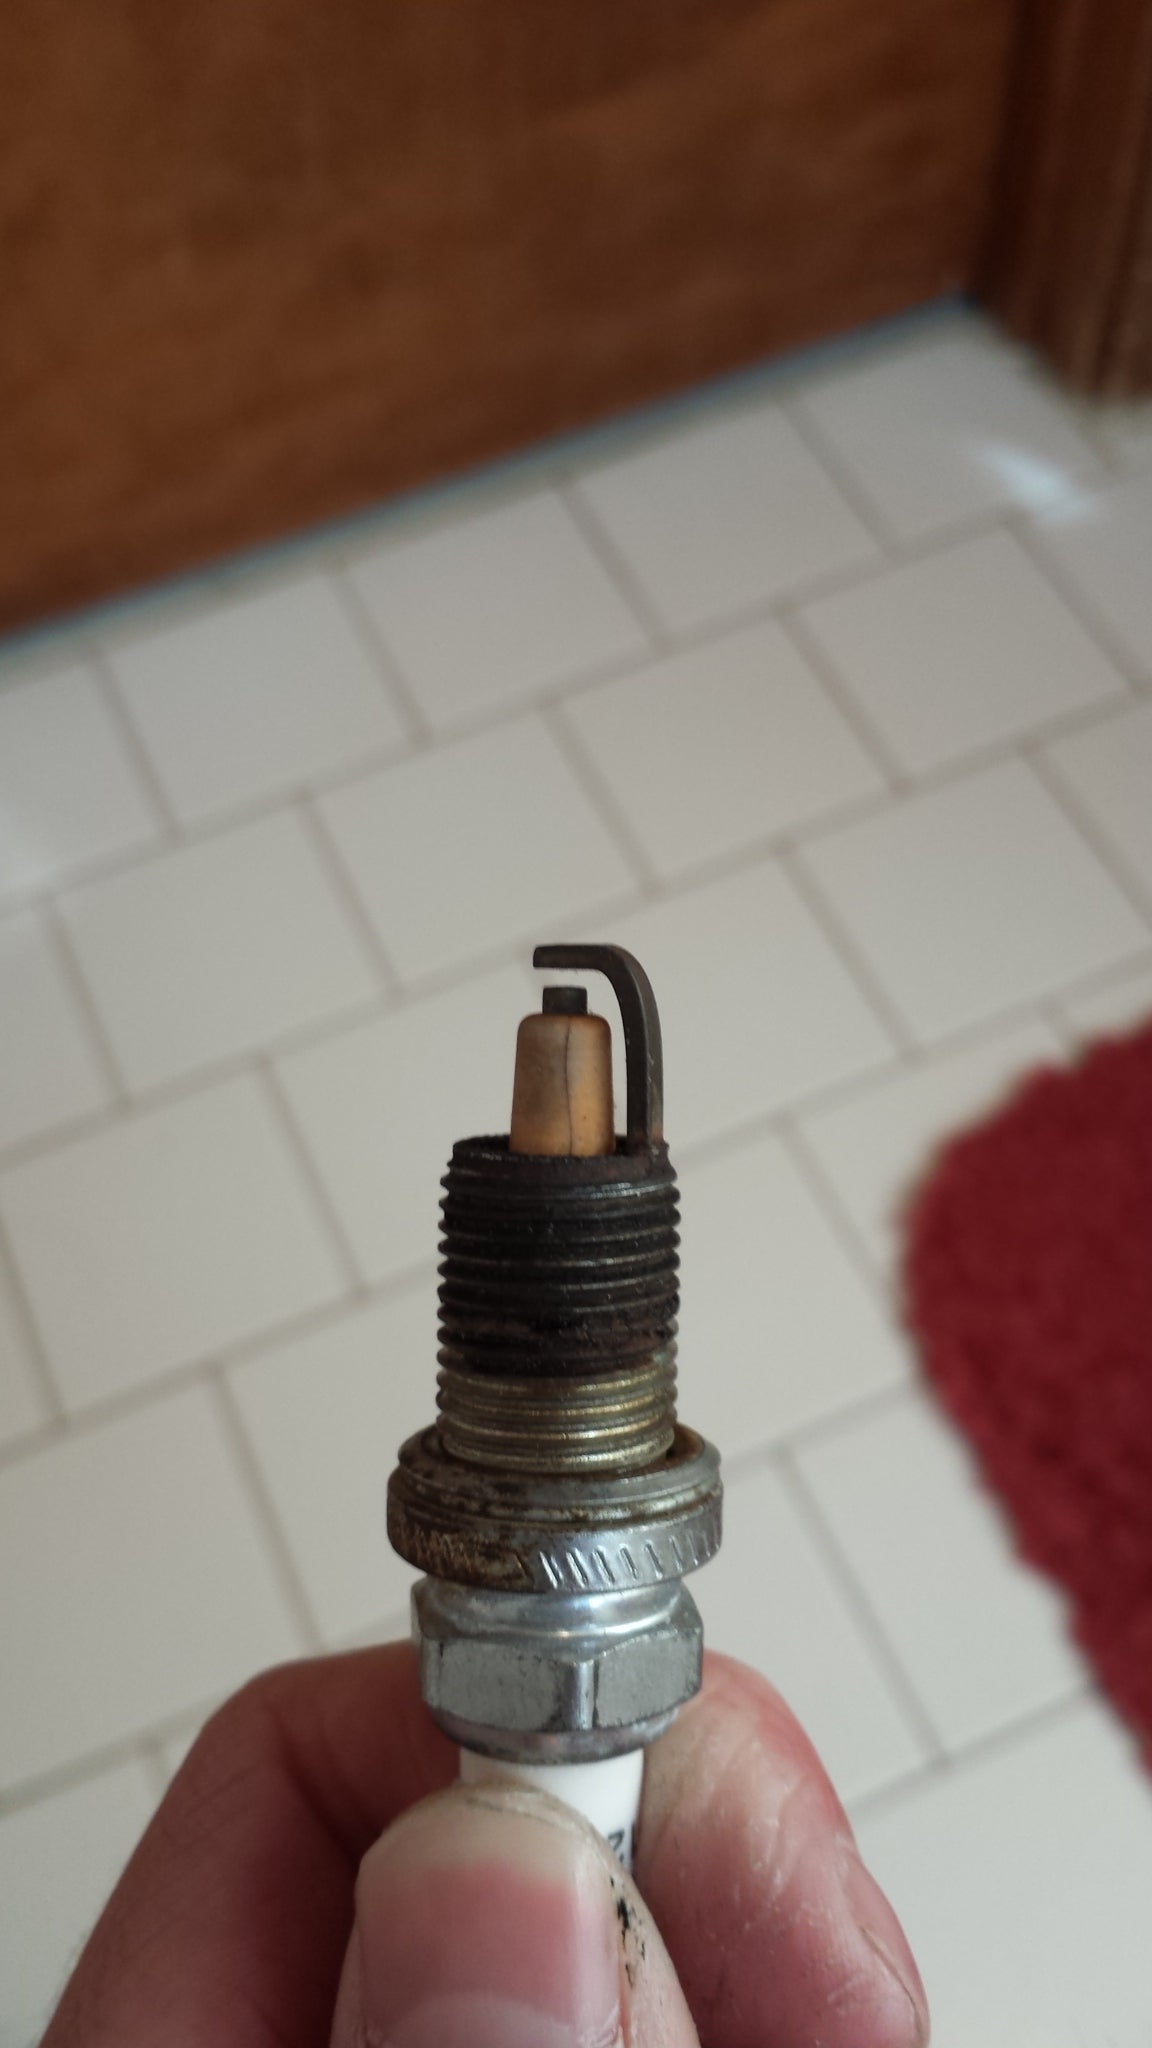 P0303 Code - Cylinder #3 Misfire | Jeep Enthusiast Forums